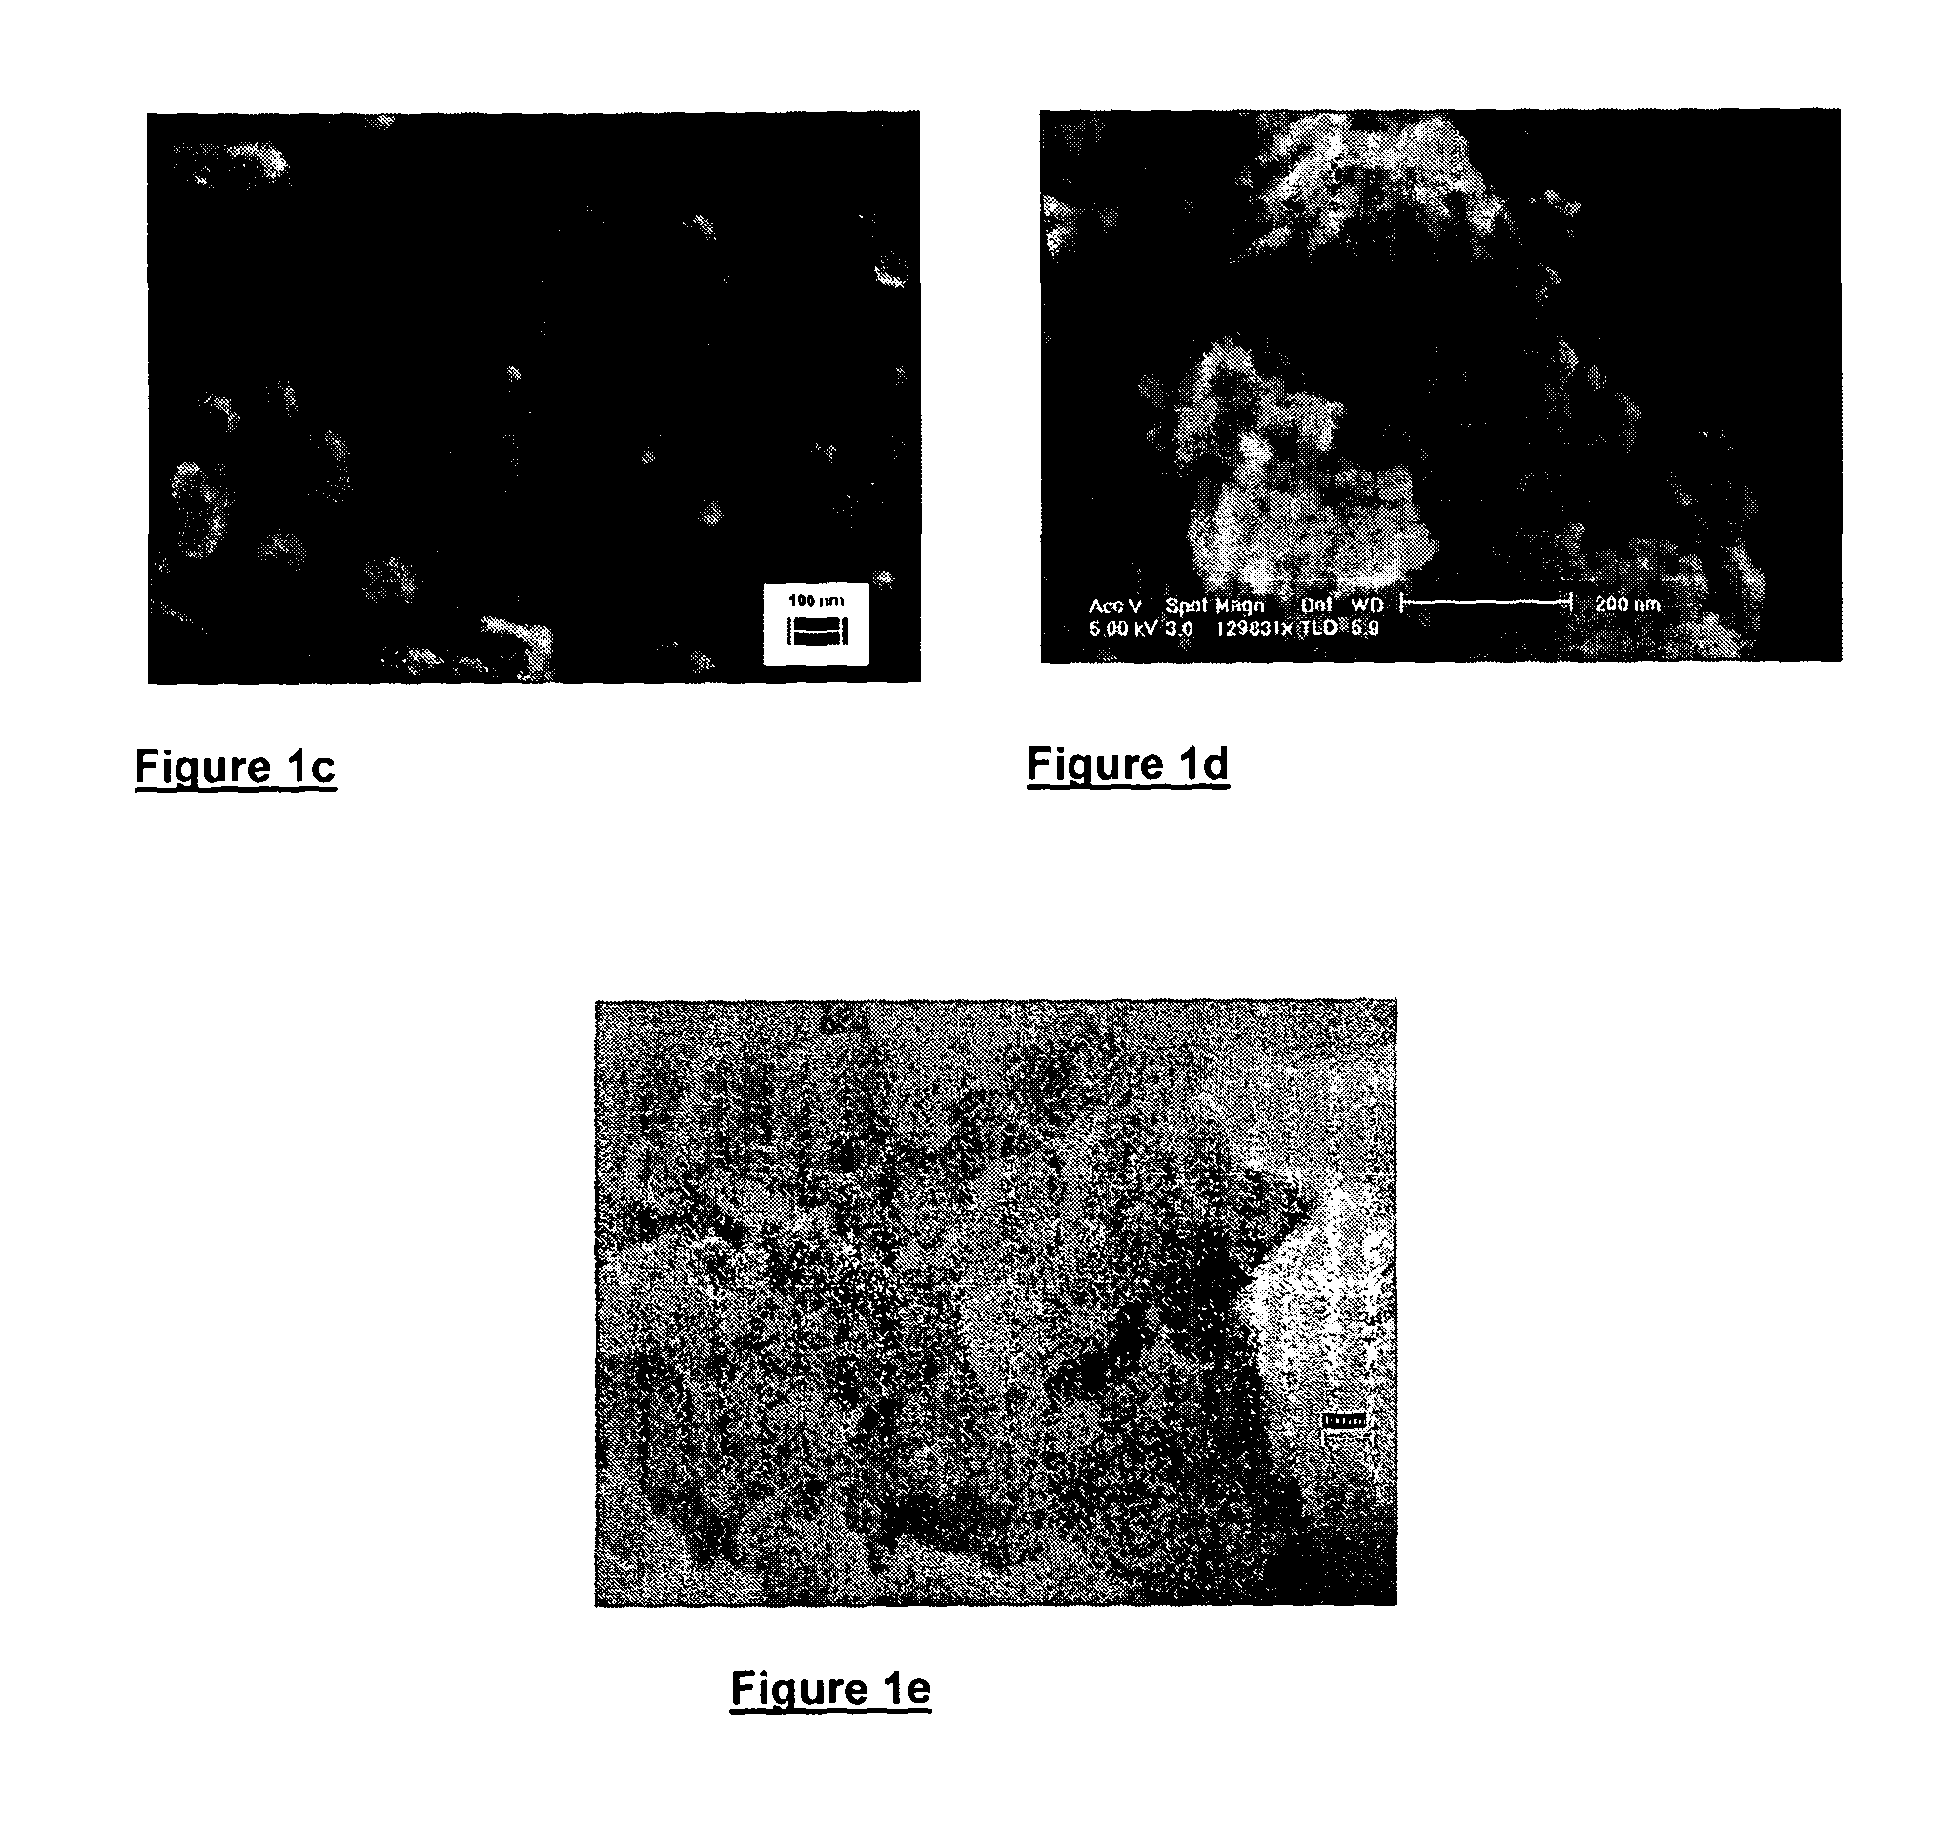 Smectic A compositions for use in optical devices